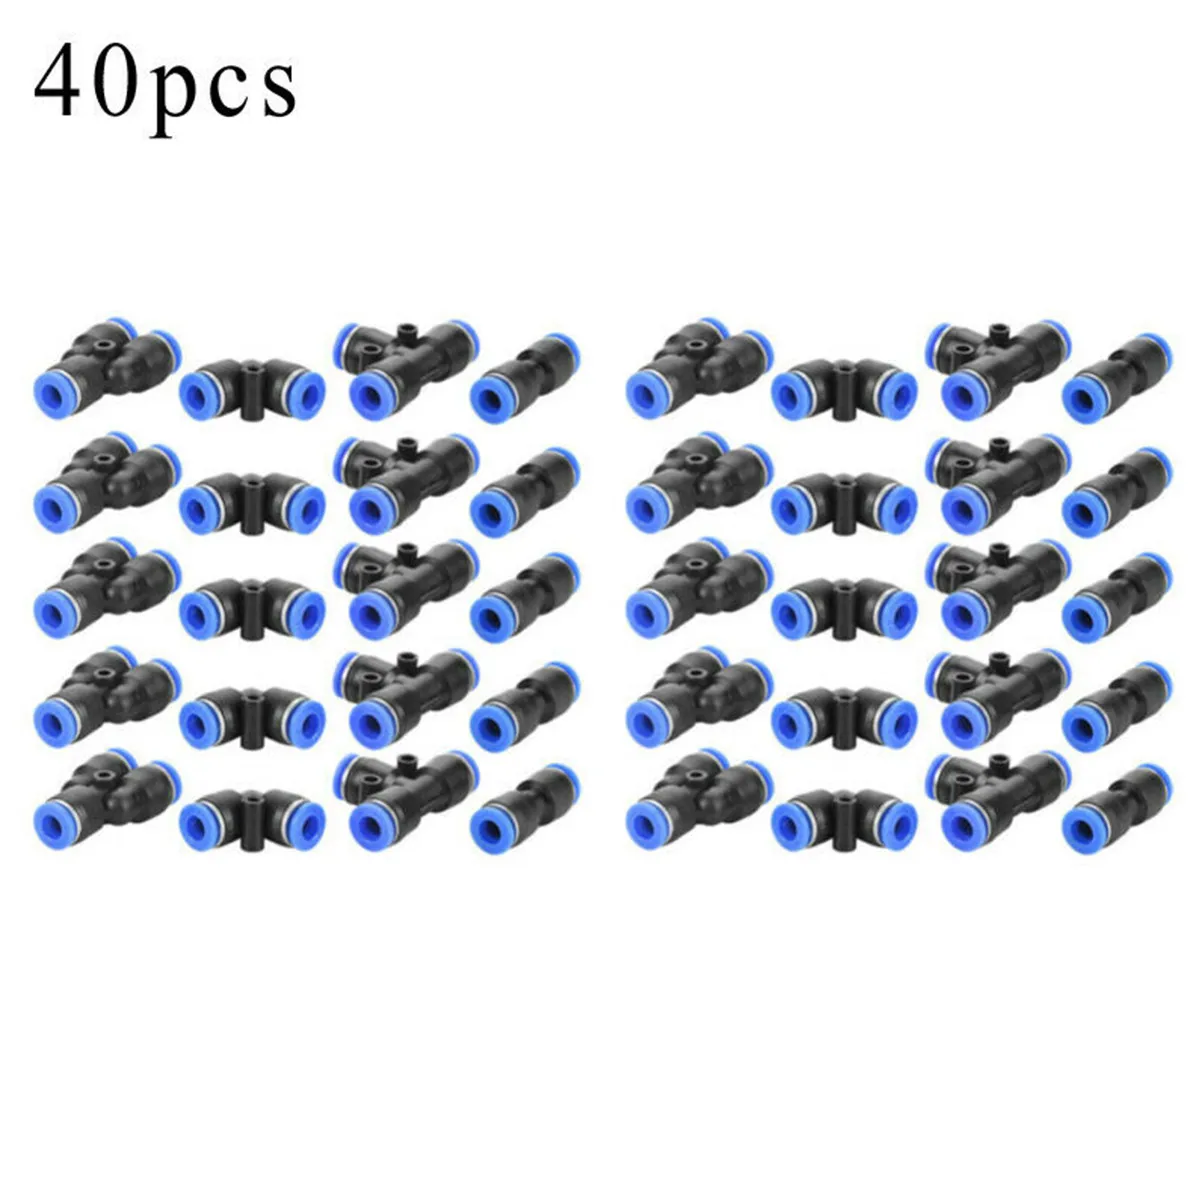 

40PCS/Bag 6mm OD 1/4 Inch Plastic Pneumatic Push Connector Set Air Line Quick Fittings One Touch Fittings Push Fit Connectors